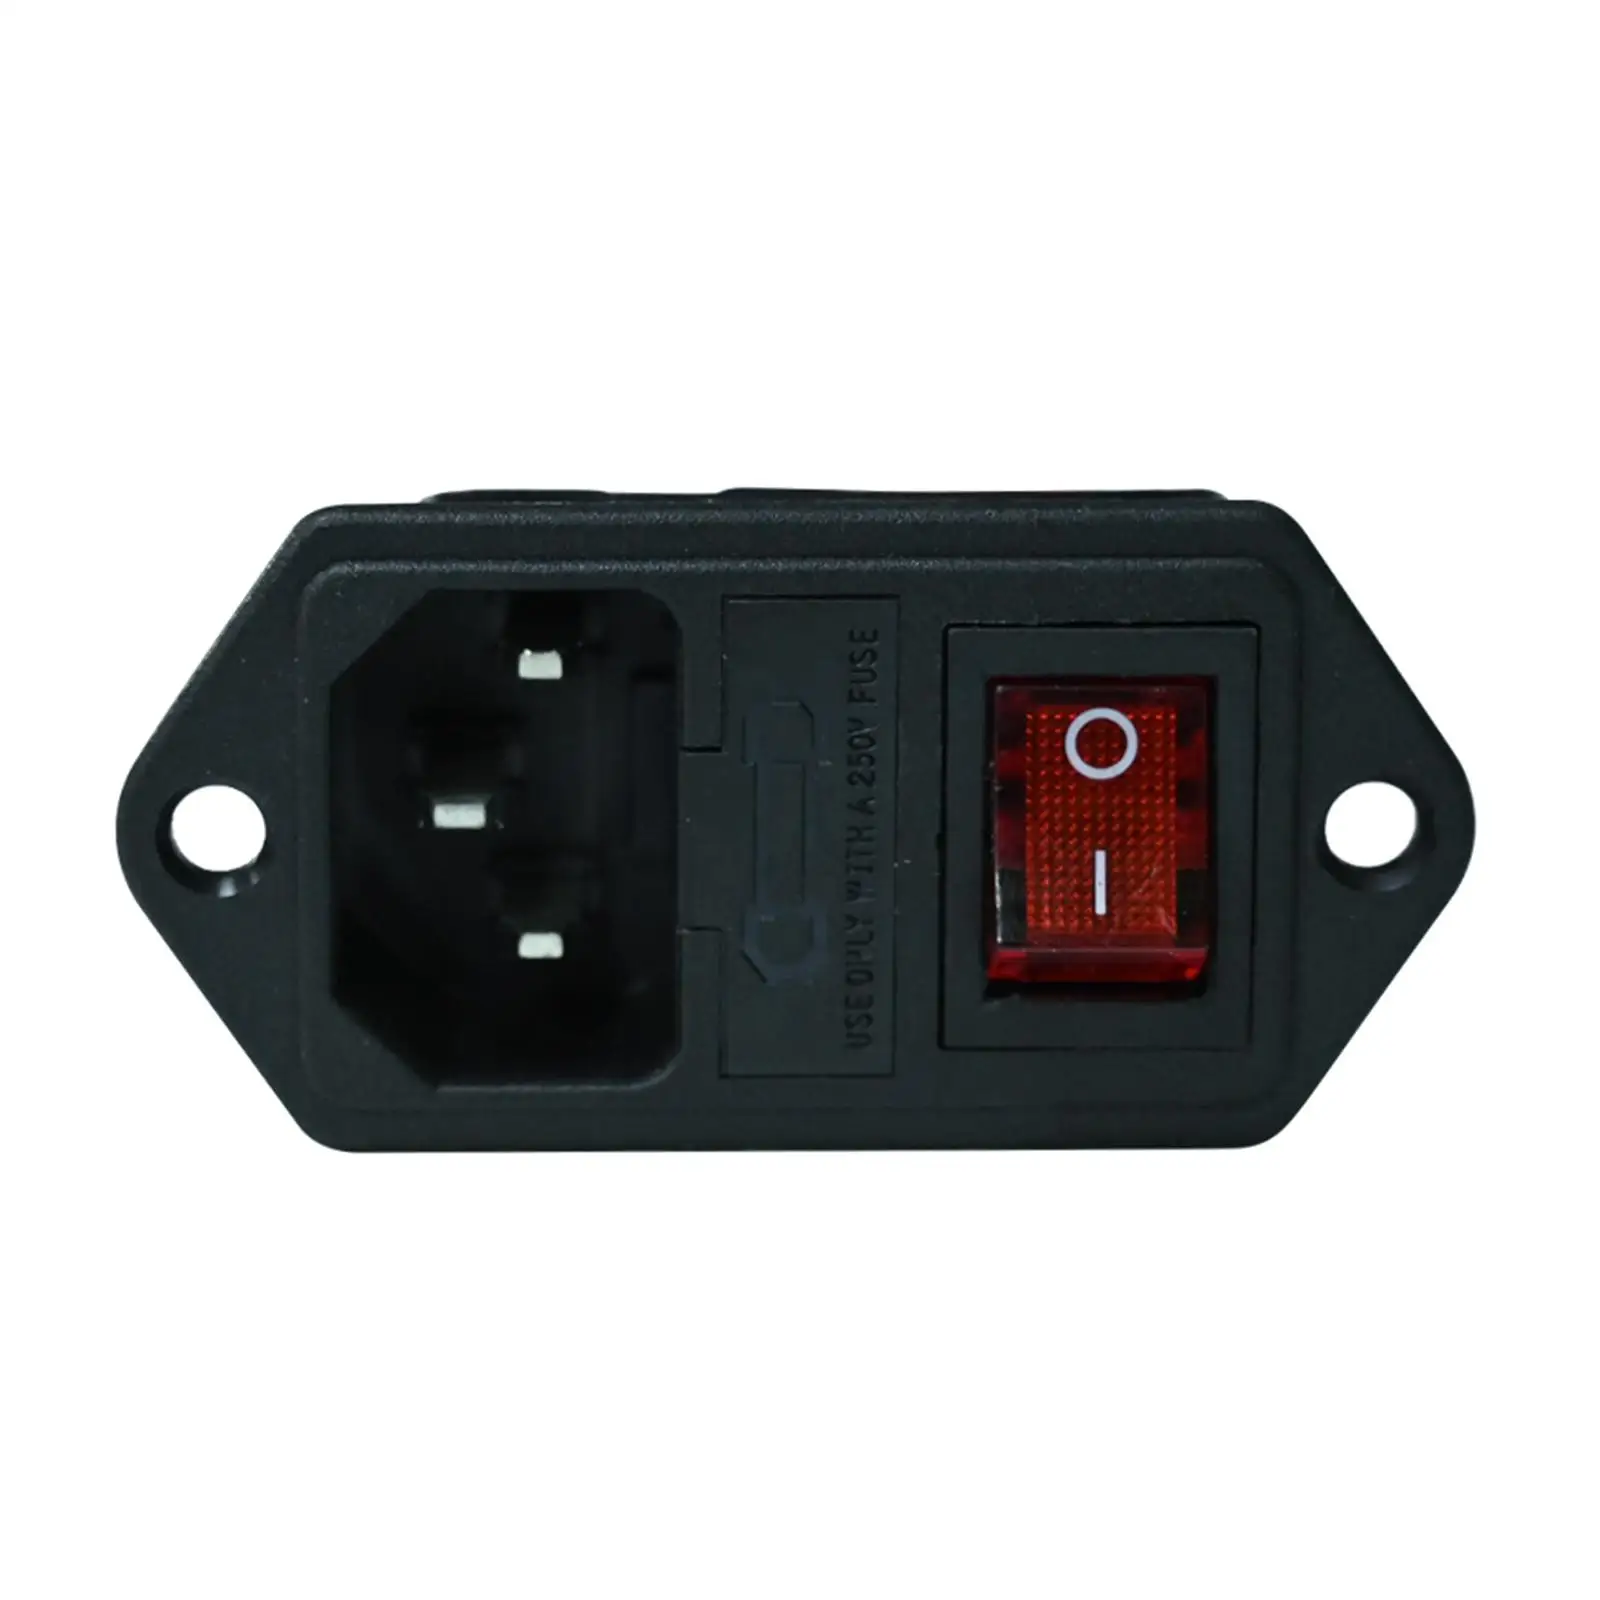 

10A 250V Rocker Switch Power Socket Inlet Module 3D Printer Parts & Accessories 3 Pin with Fuse Holder 3D Printer Power Socket